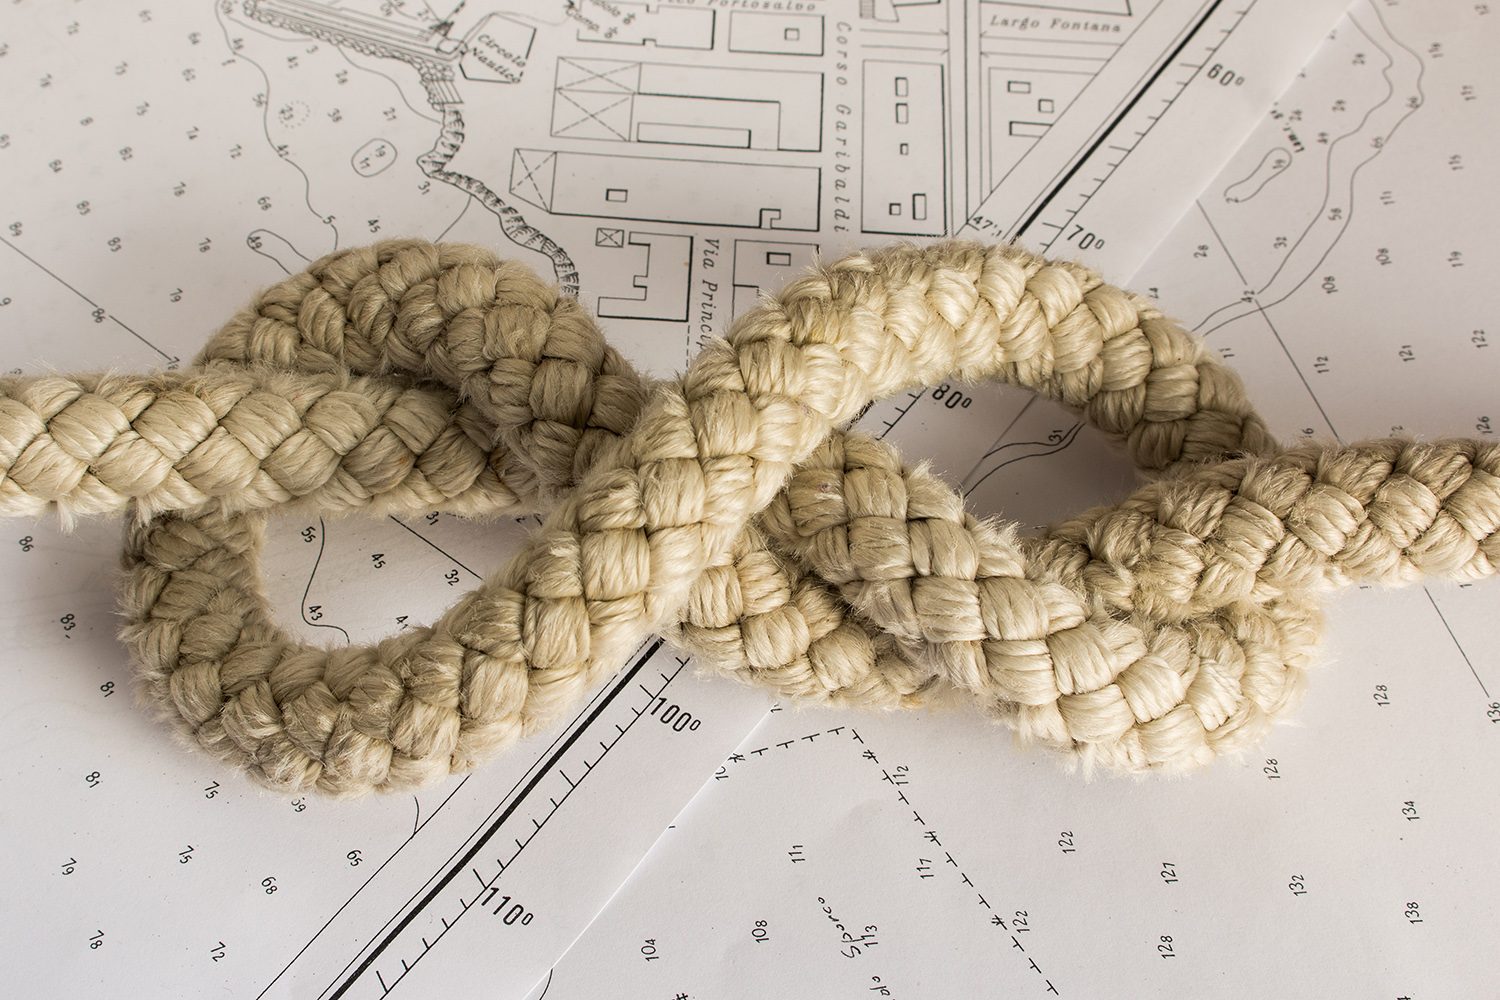 10 Popular Sailing Knots and How to Tie Them